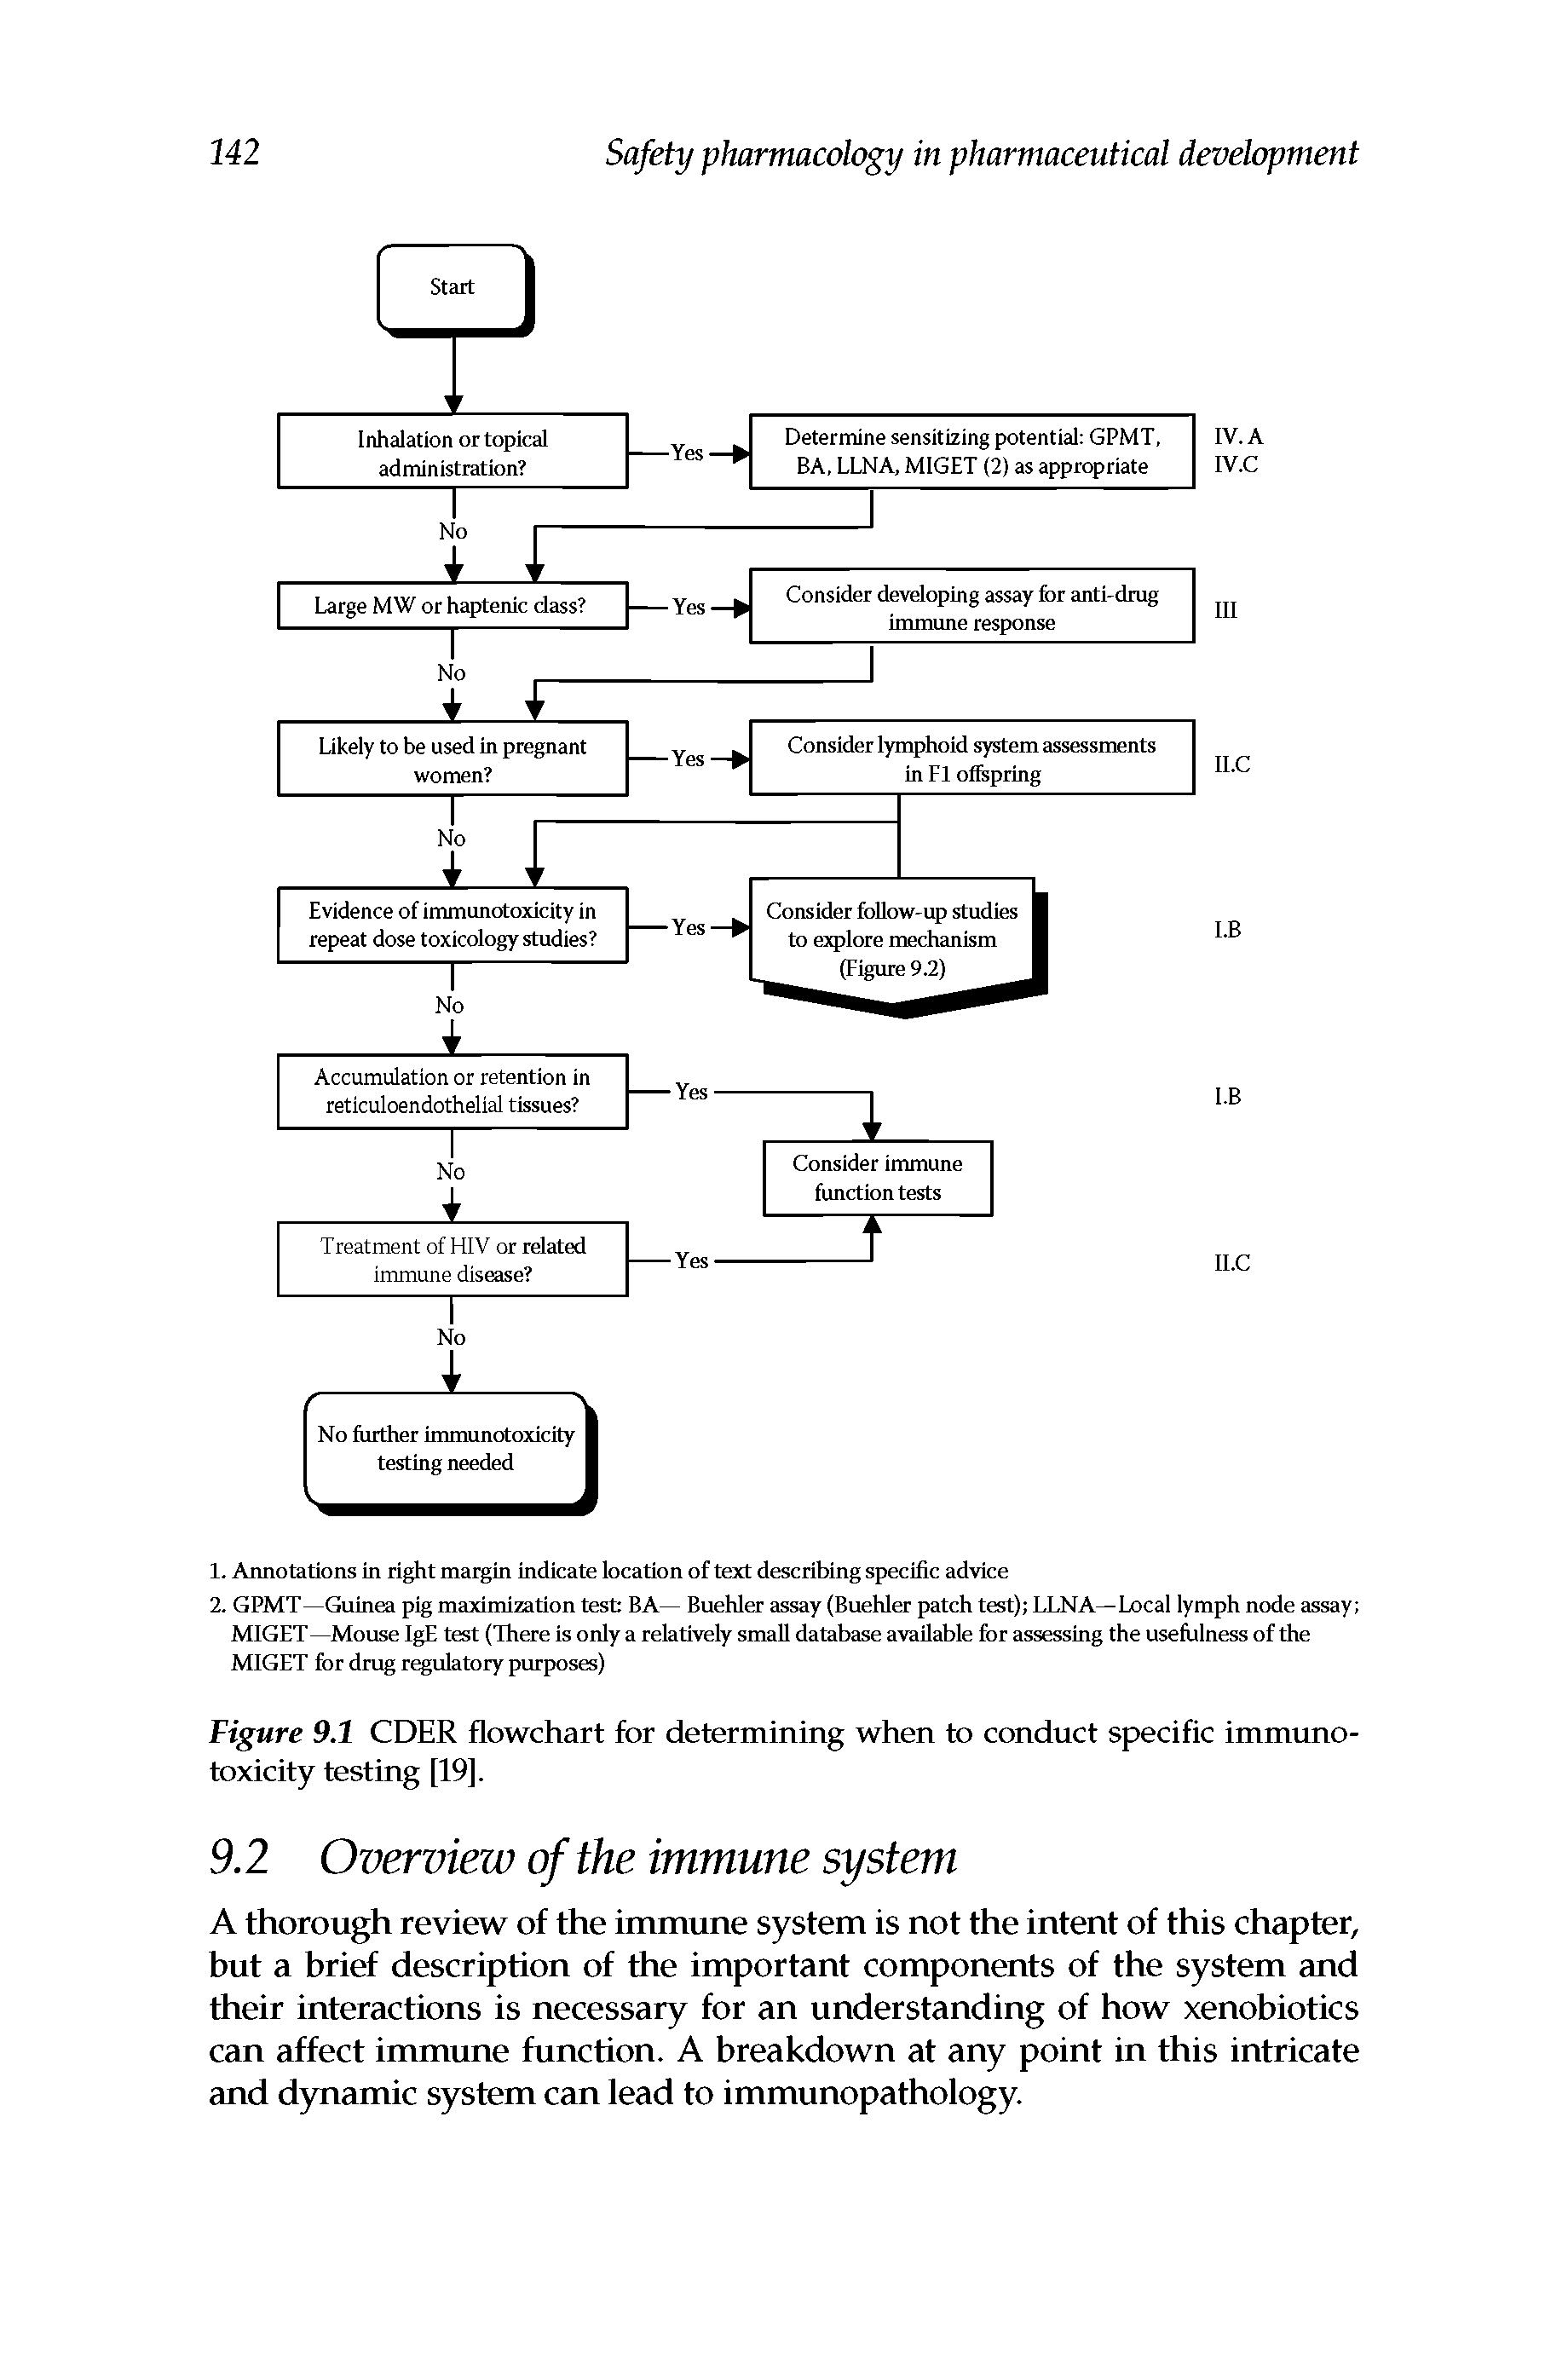 Figure 9.1 CDER flowchart for determining when to conduct specific immunotoxicity testing [19].